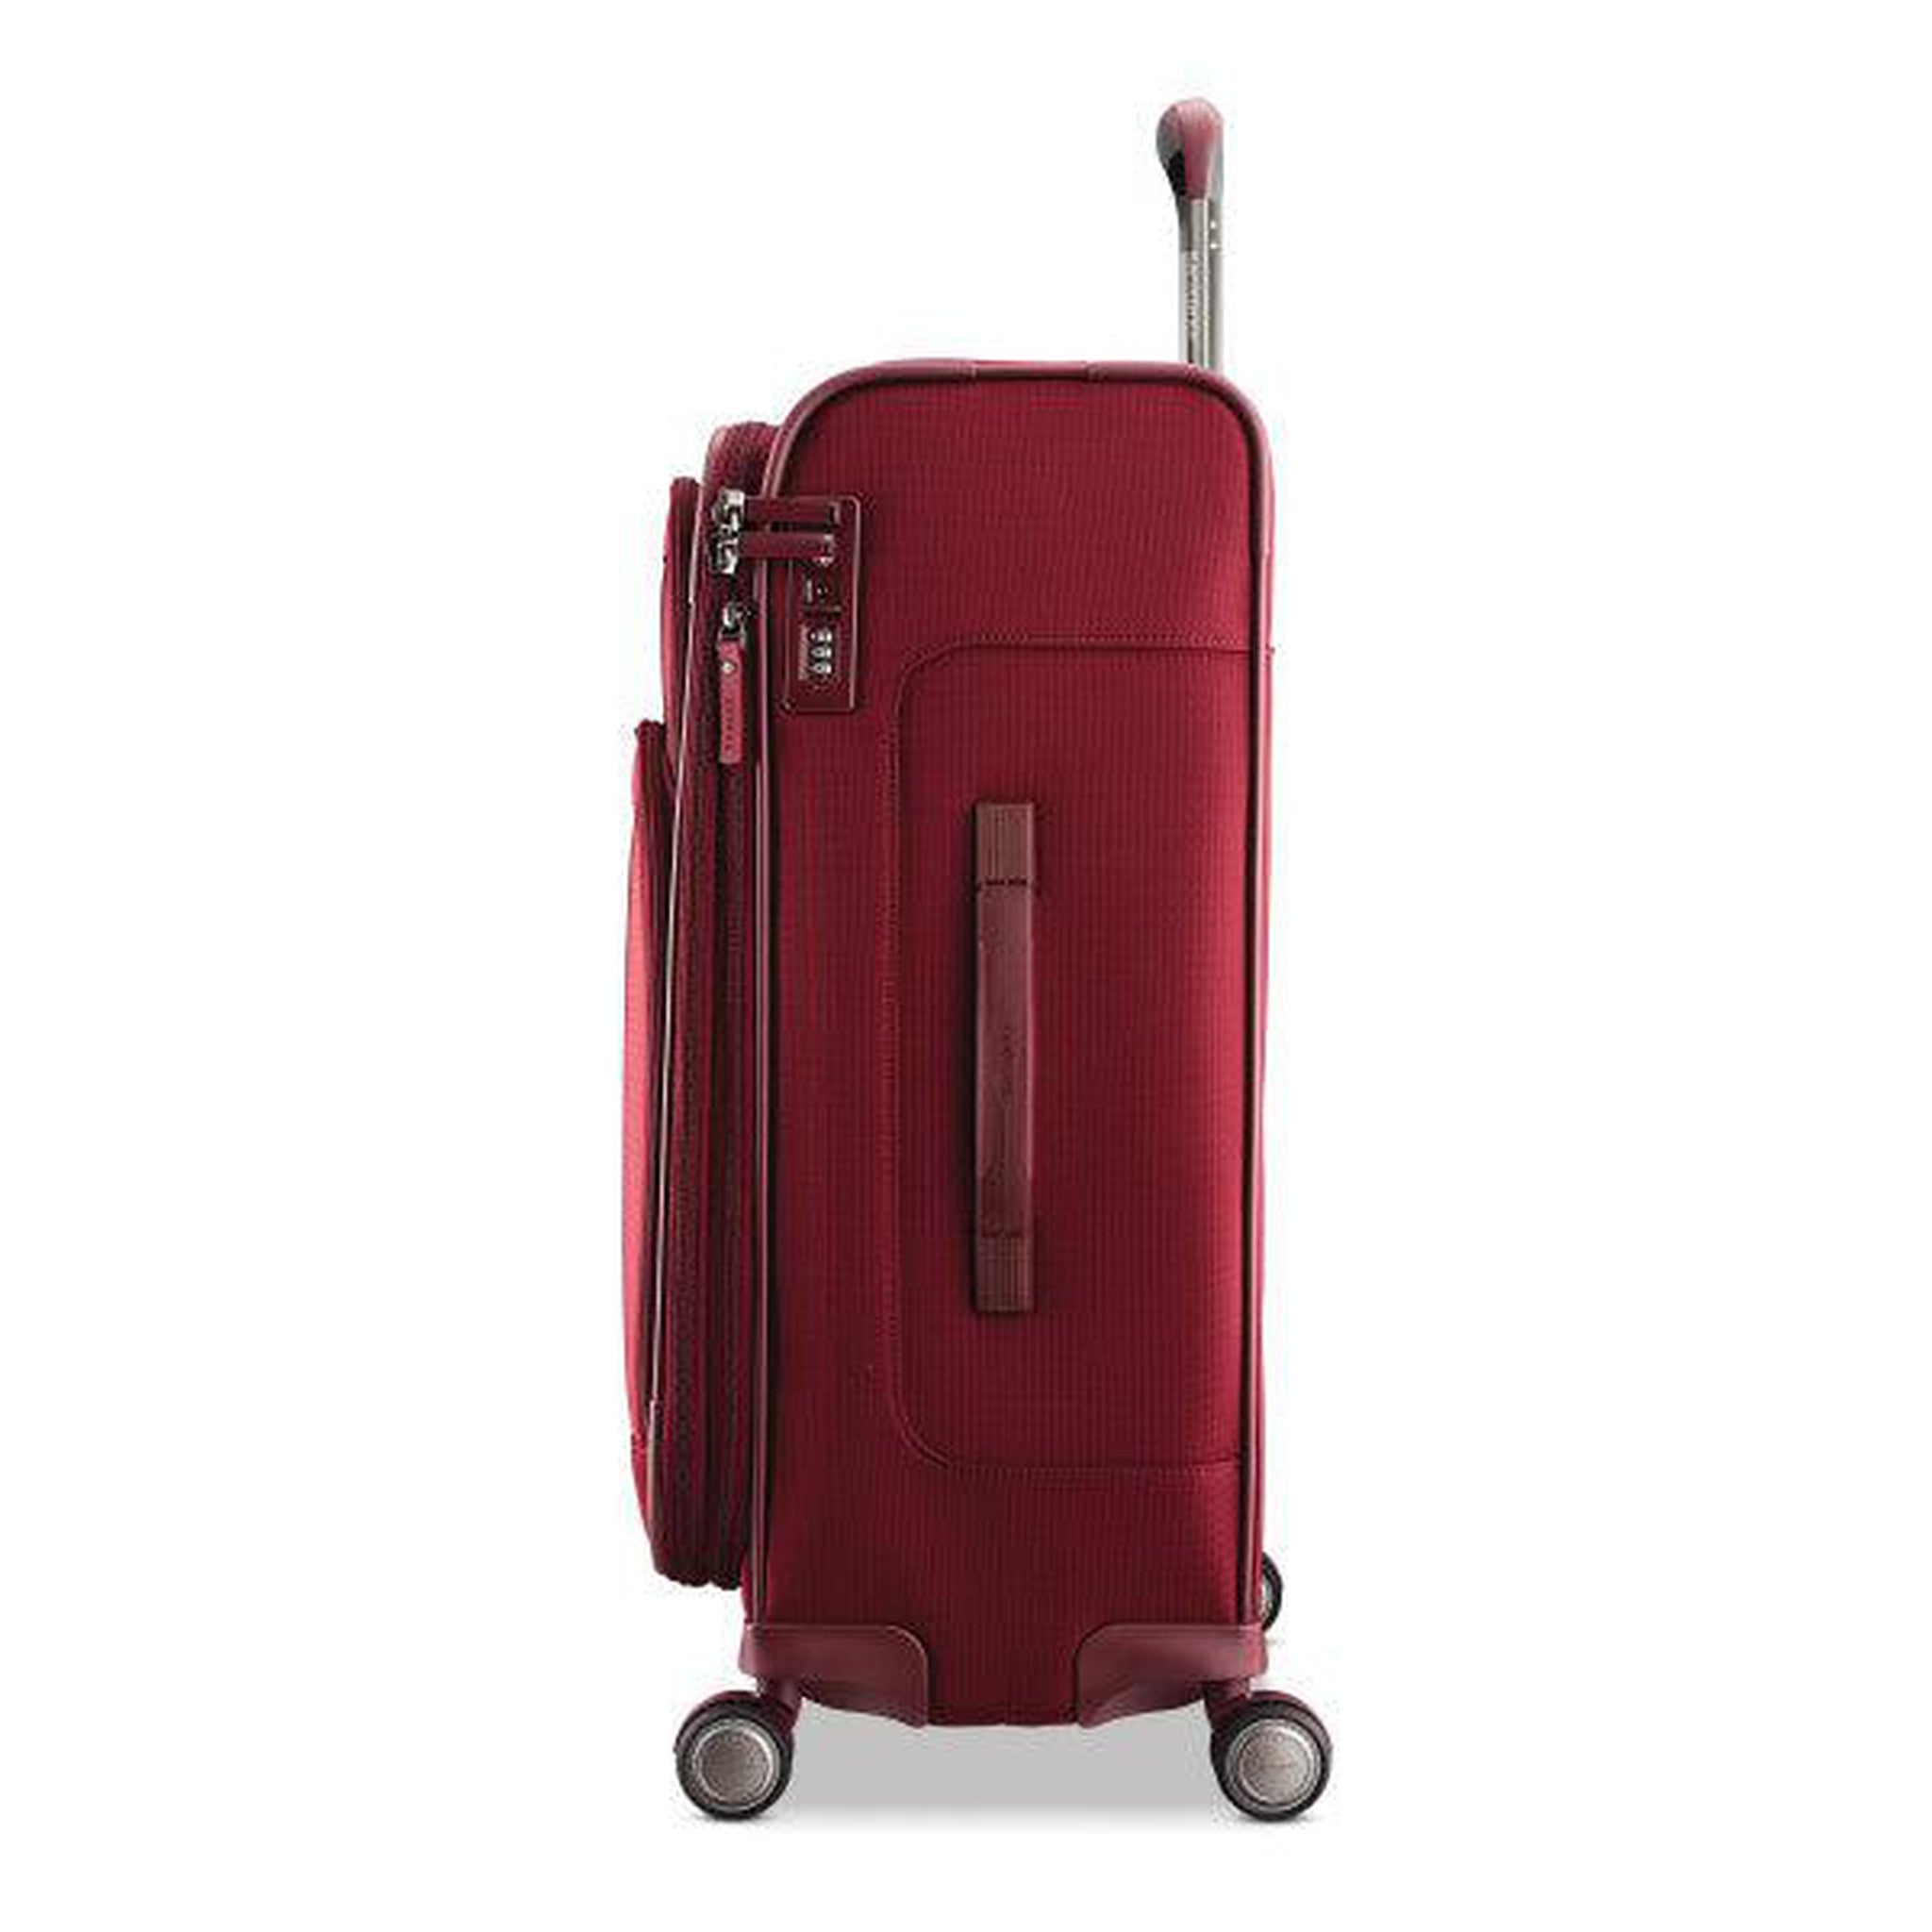 Samsonite Silhouette 17 Luggage Collection